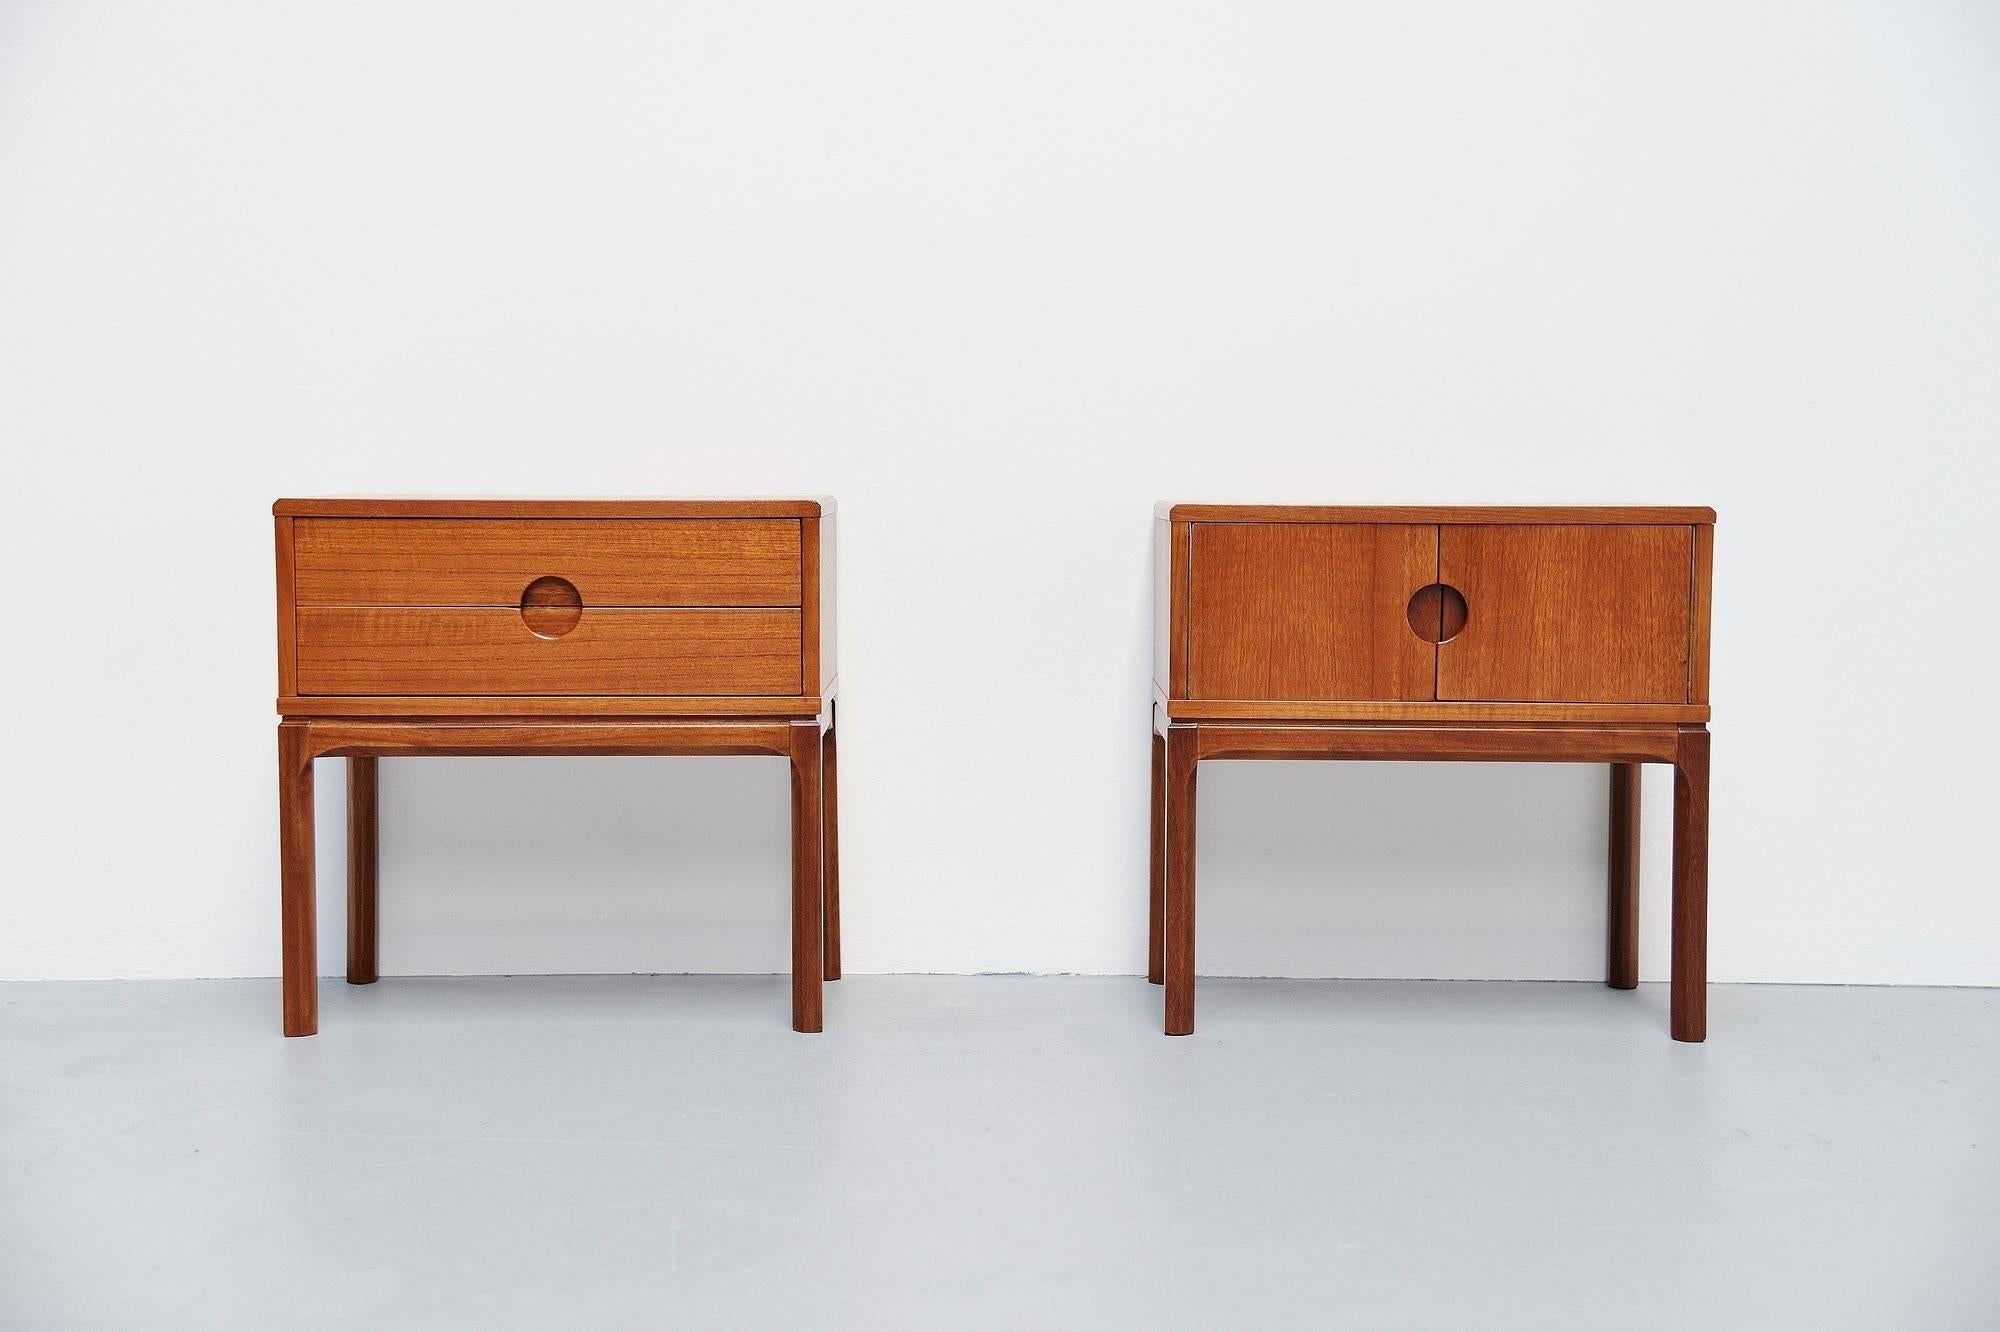 Nice pair of night cabinets designed by Aksel Kjersgaard and manufactured by Odder Mobelfabrik, Denmark 1955. This set of cabinets is made of teak wood and has very nice Danish lines. One cabinet has two drawers; the other one has two folding doors.